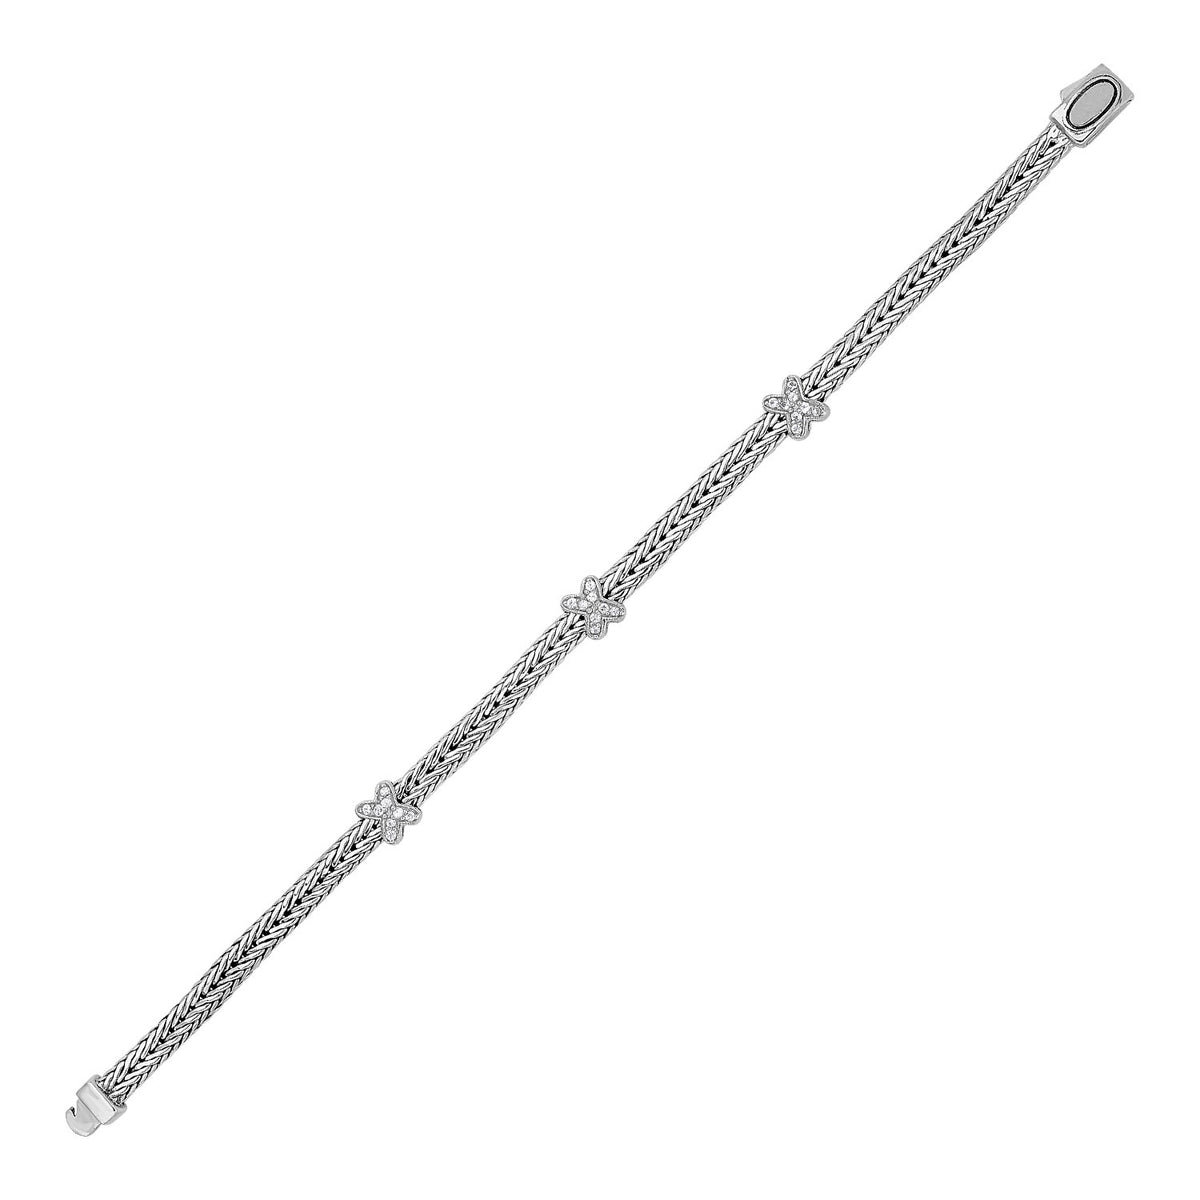 Woven Rope Bracelet with White Sapphire X Accents - Sterling Silver 2.00mm